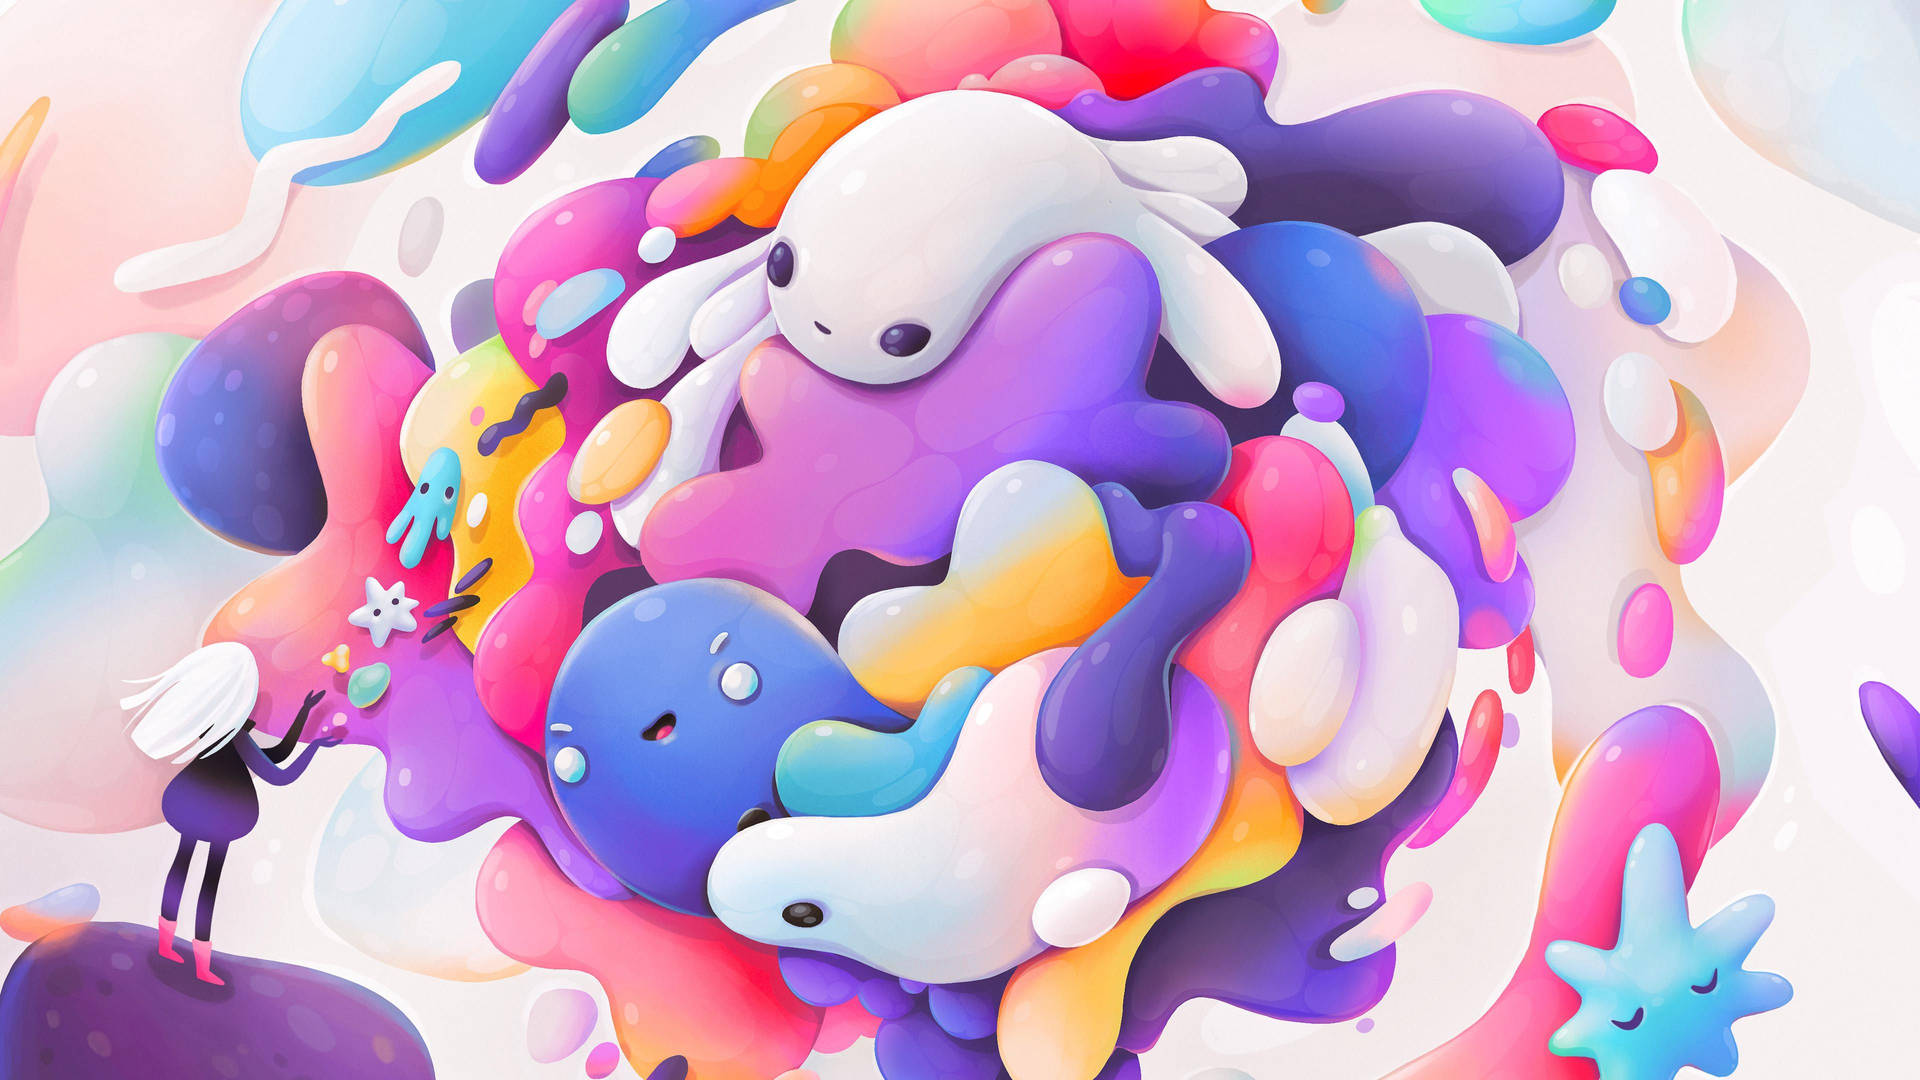 Tải xuống APK Doodle Wallpaper Art cho Android